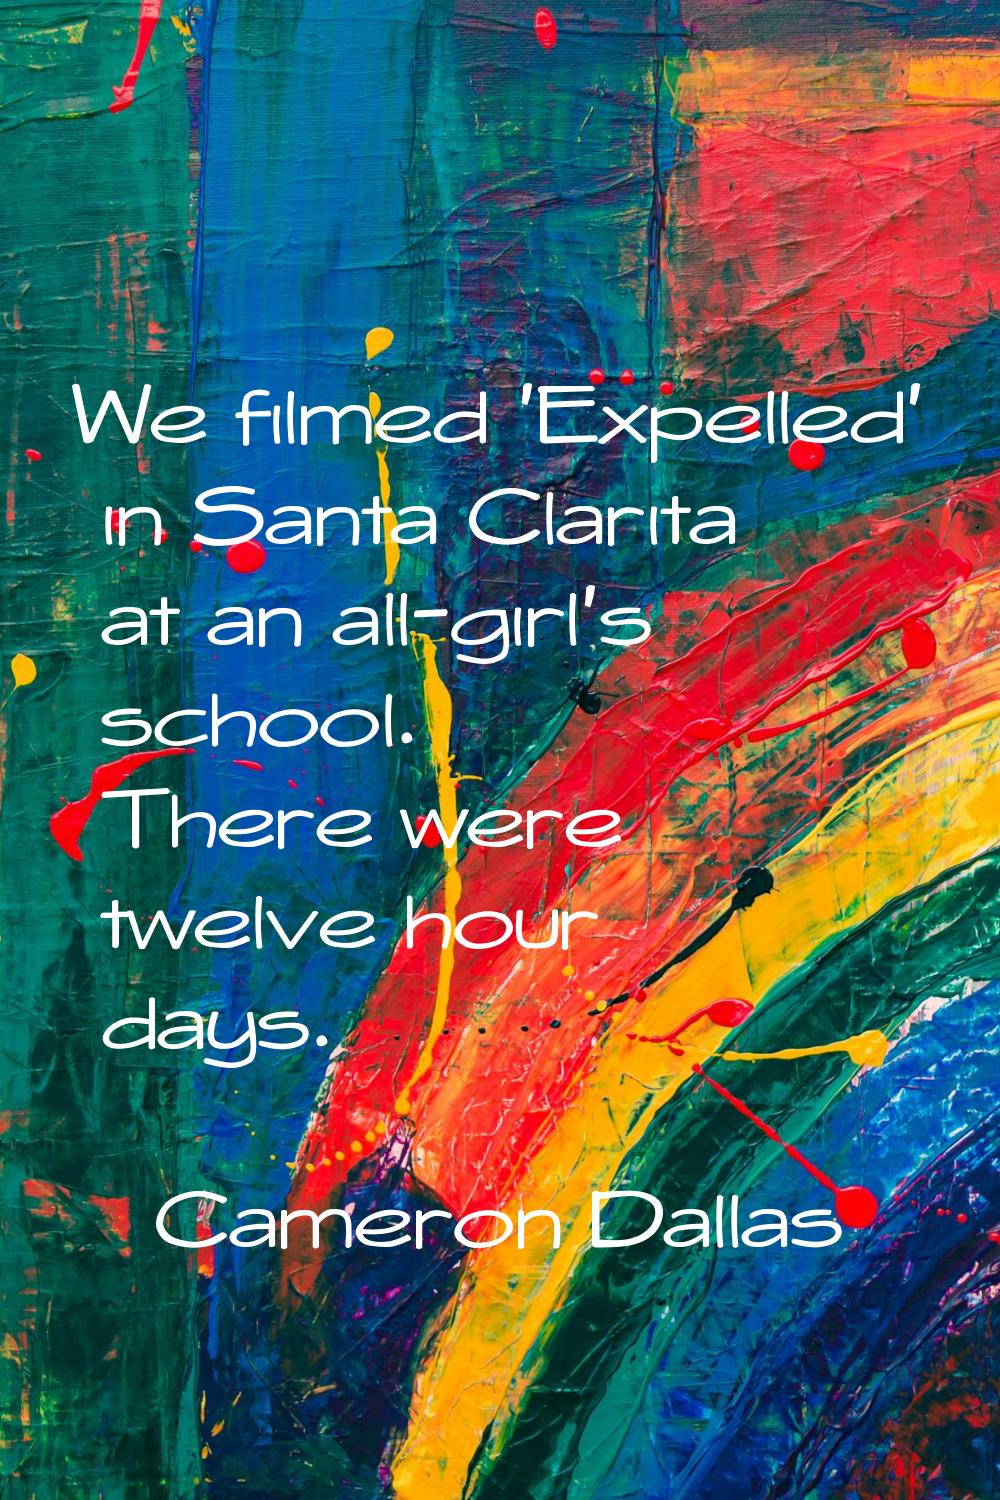 We filmed 'Expelled' in Santa Clarita at an all-girl's school. There were twelve hour days.